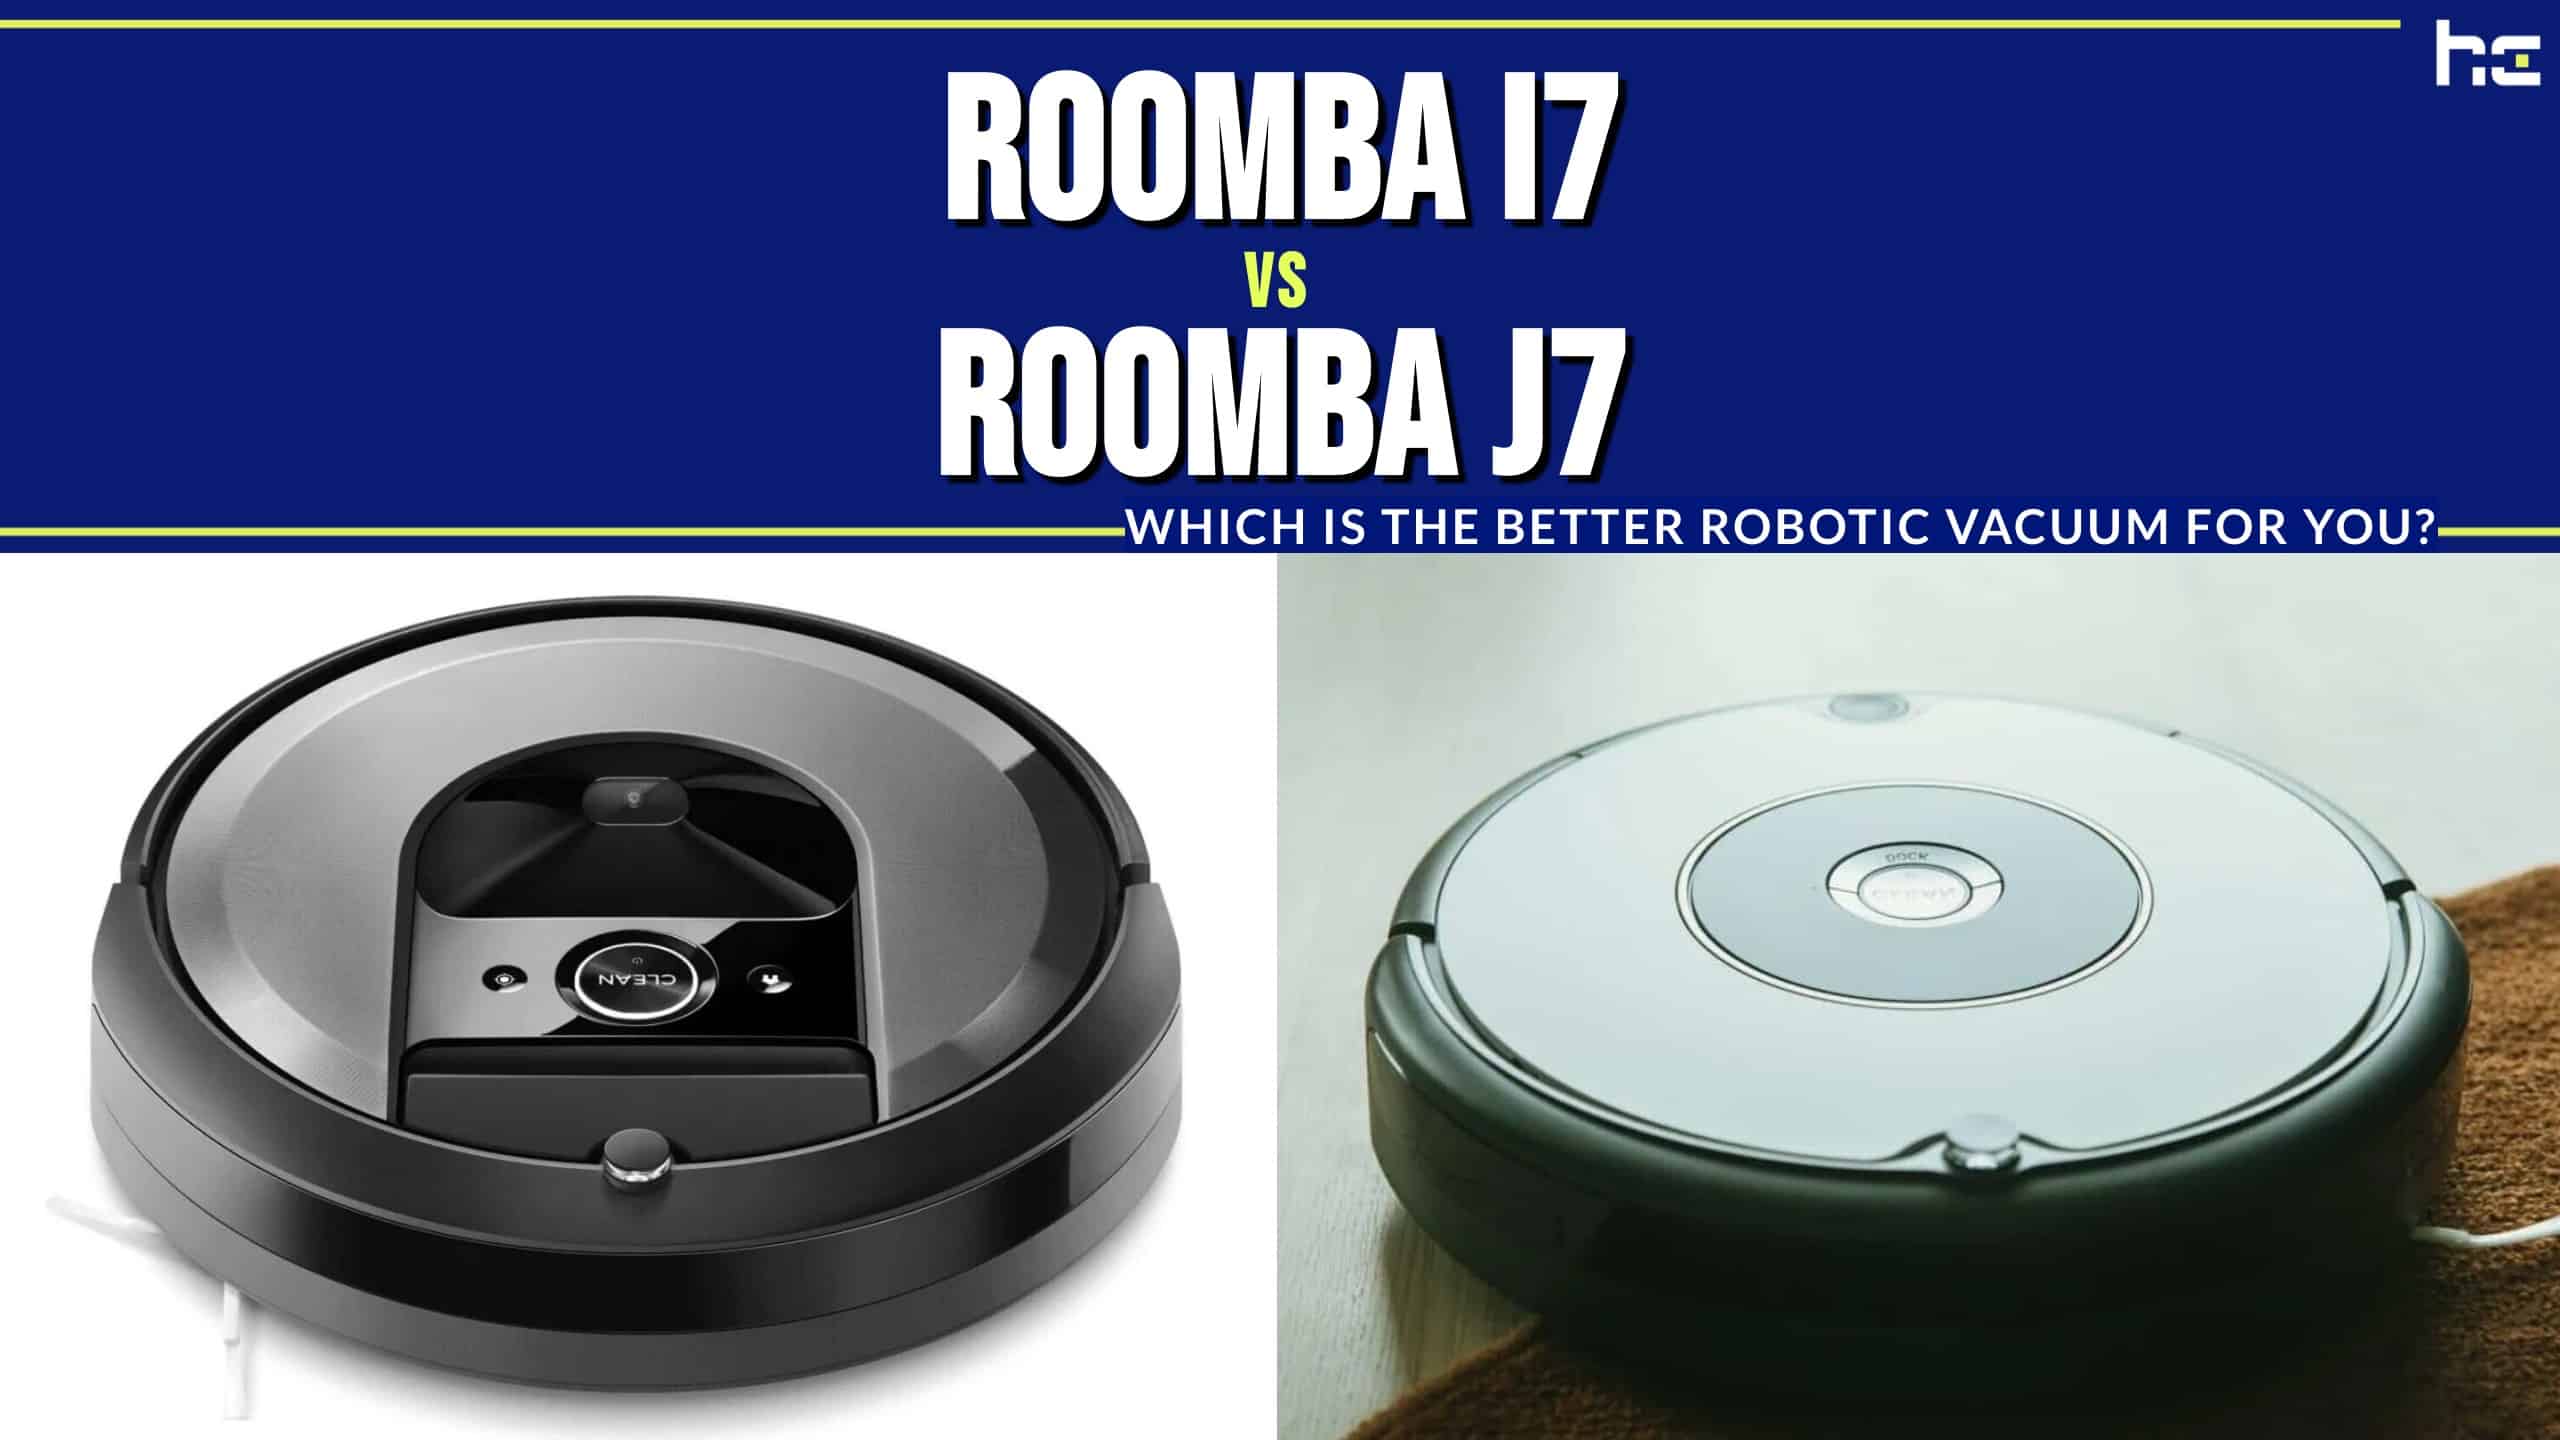 Roomba i7 vs. j7: Which is the Better Robotic Vacuum? - History